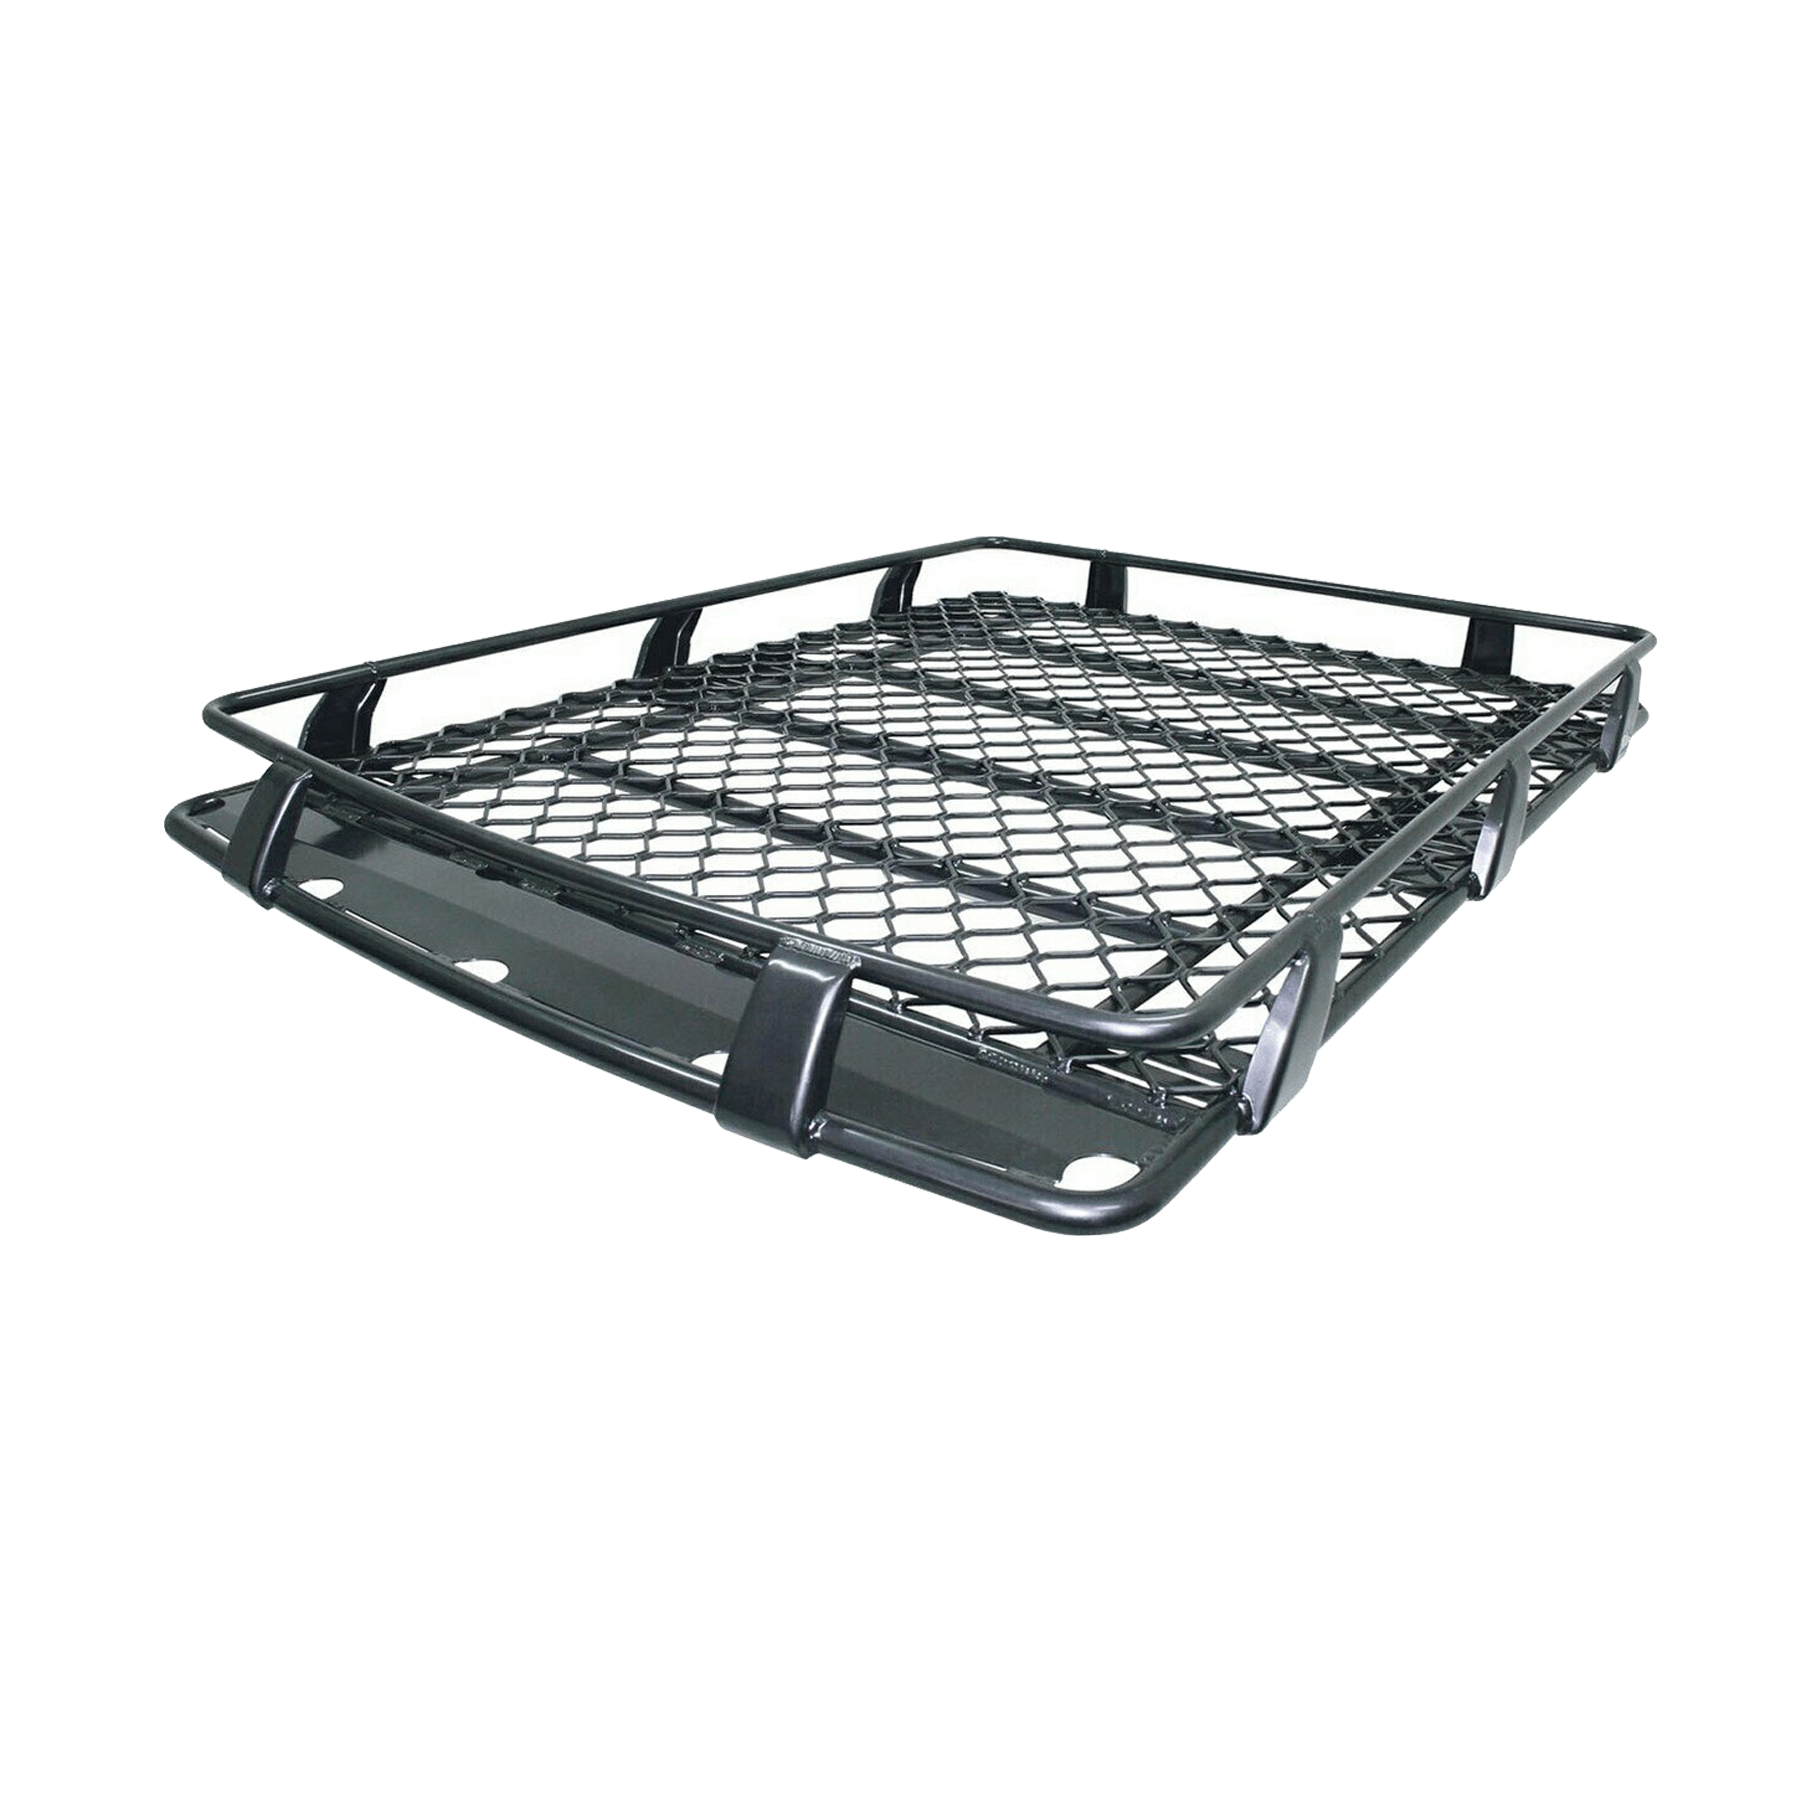 LANDCRUISER 60 SERIES 1980 TO 1989 BASKET ALLOY ROOF RACK – 2.2M X 1.25M (OPEN END)